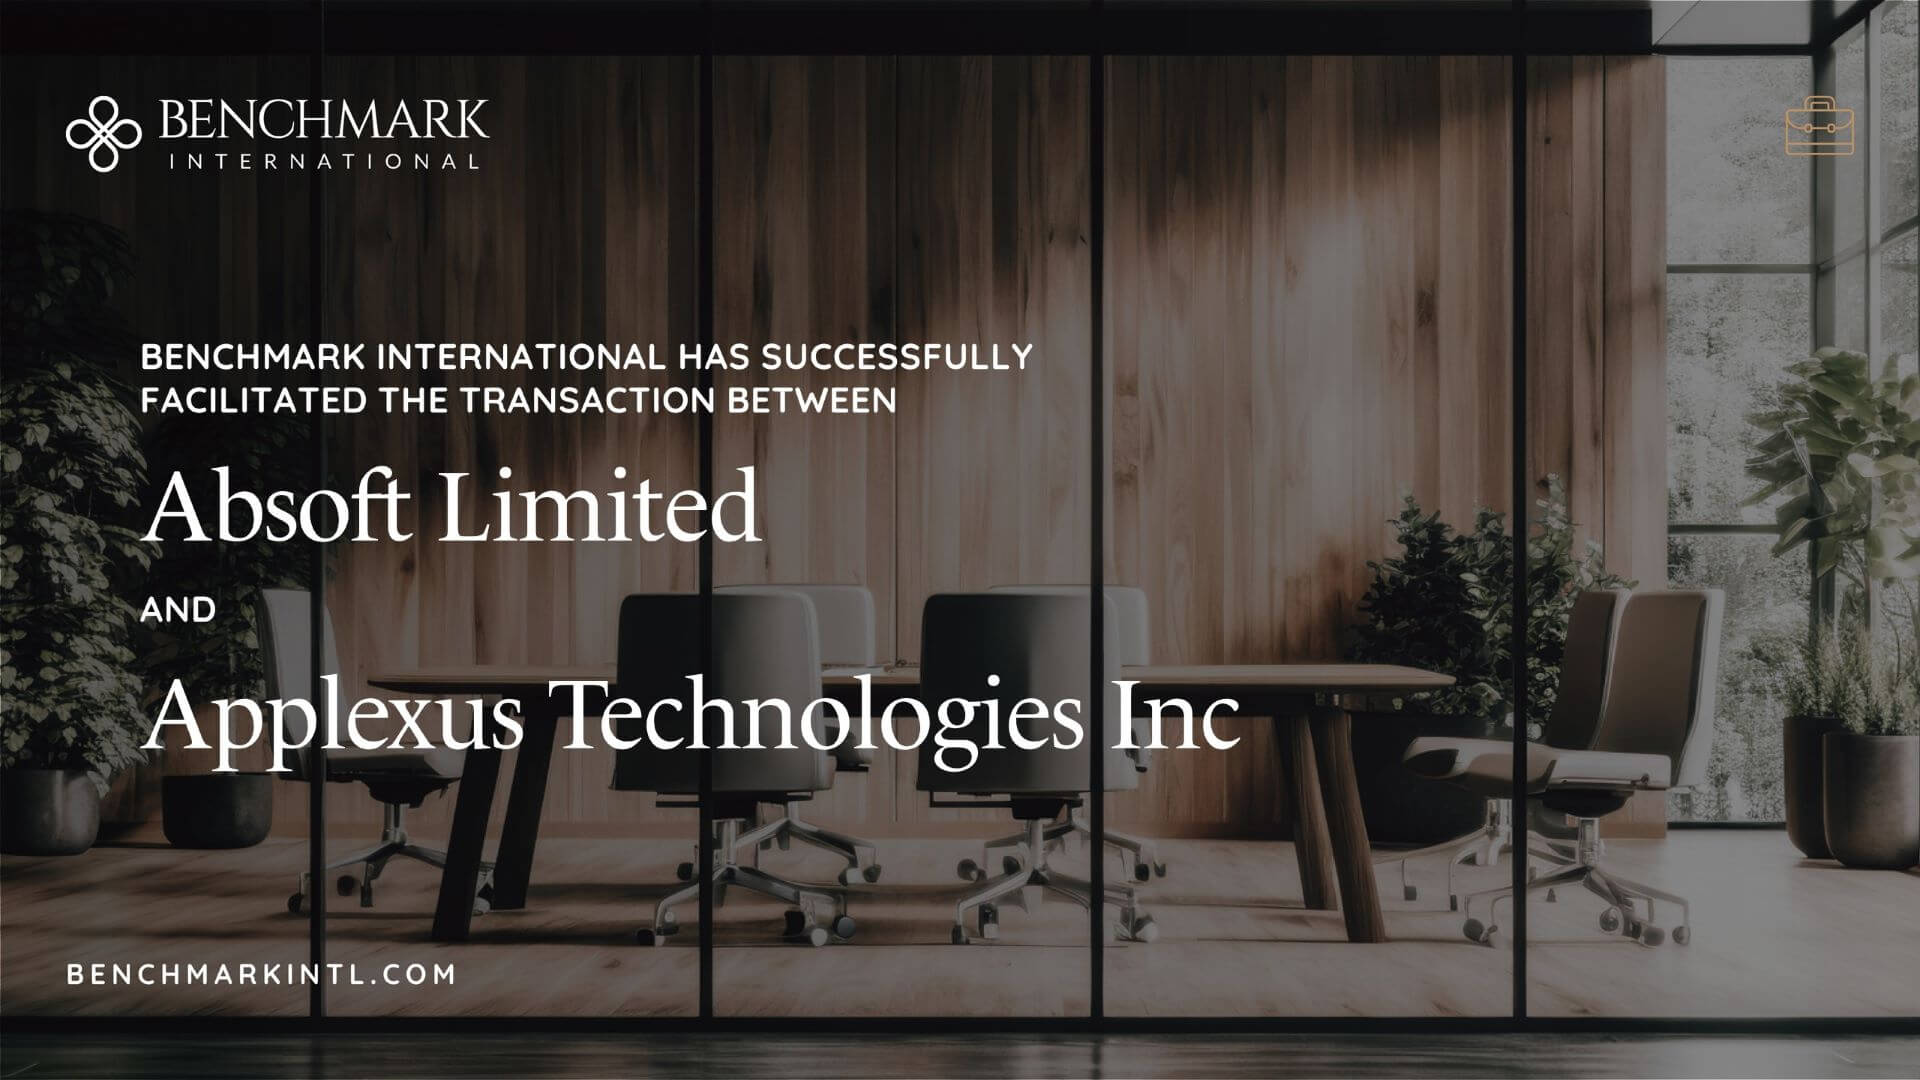 Benchmark International Successfully Facilitated the Transaction Between Absoft Limited and Applexus Technologies Inc